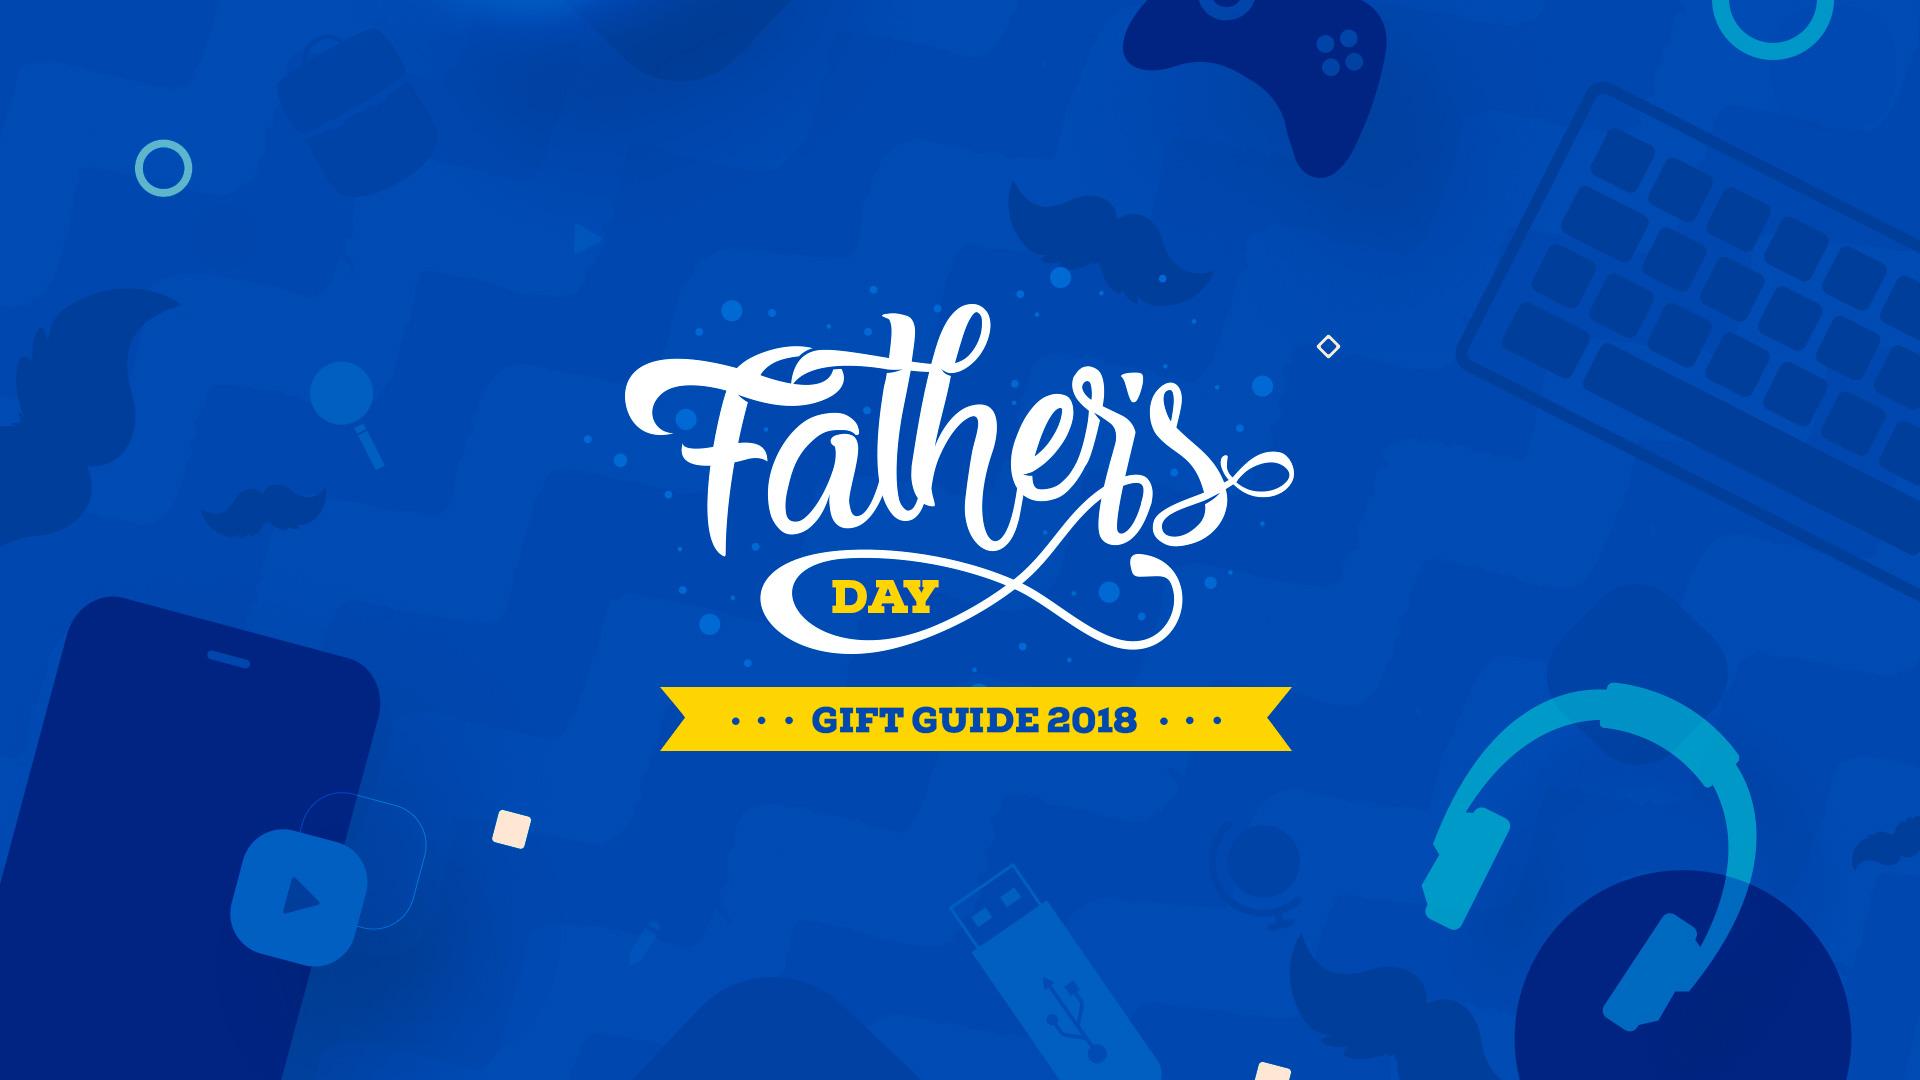 Android Central's 2019 Father's Day Guide!